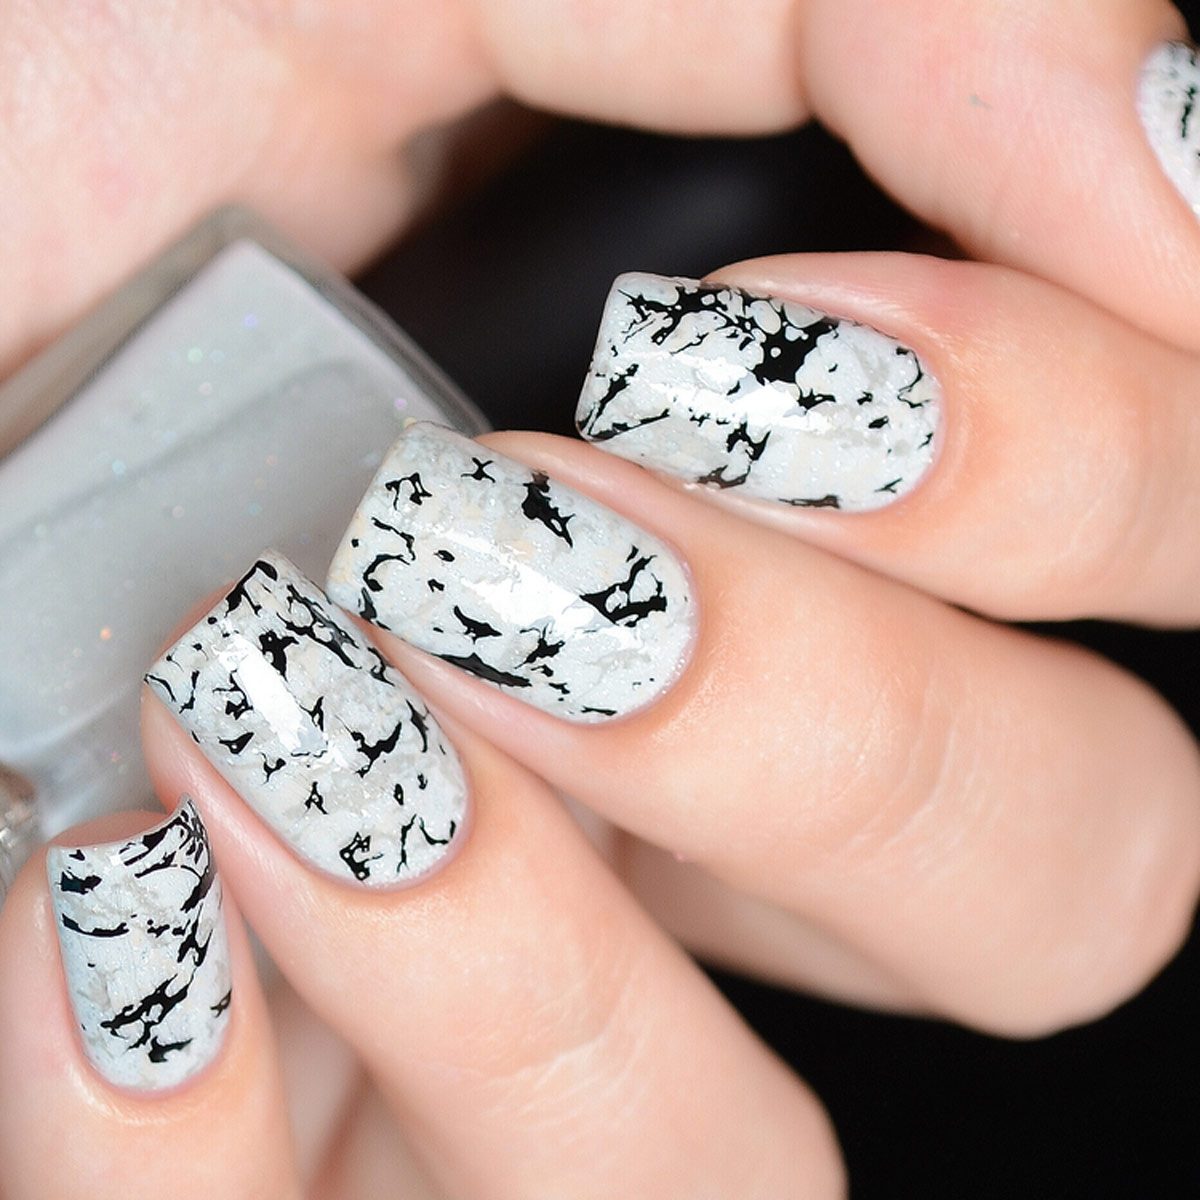 Get creative with your manicure